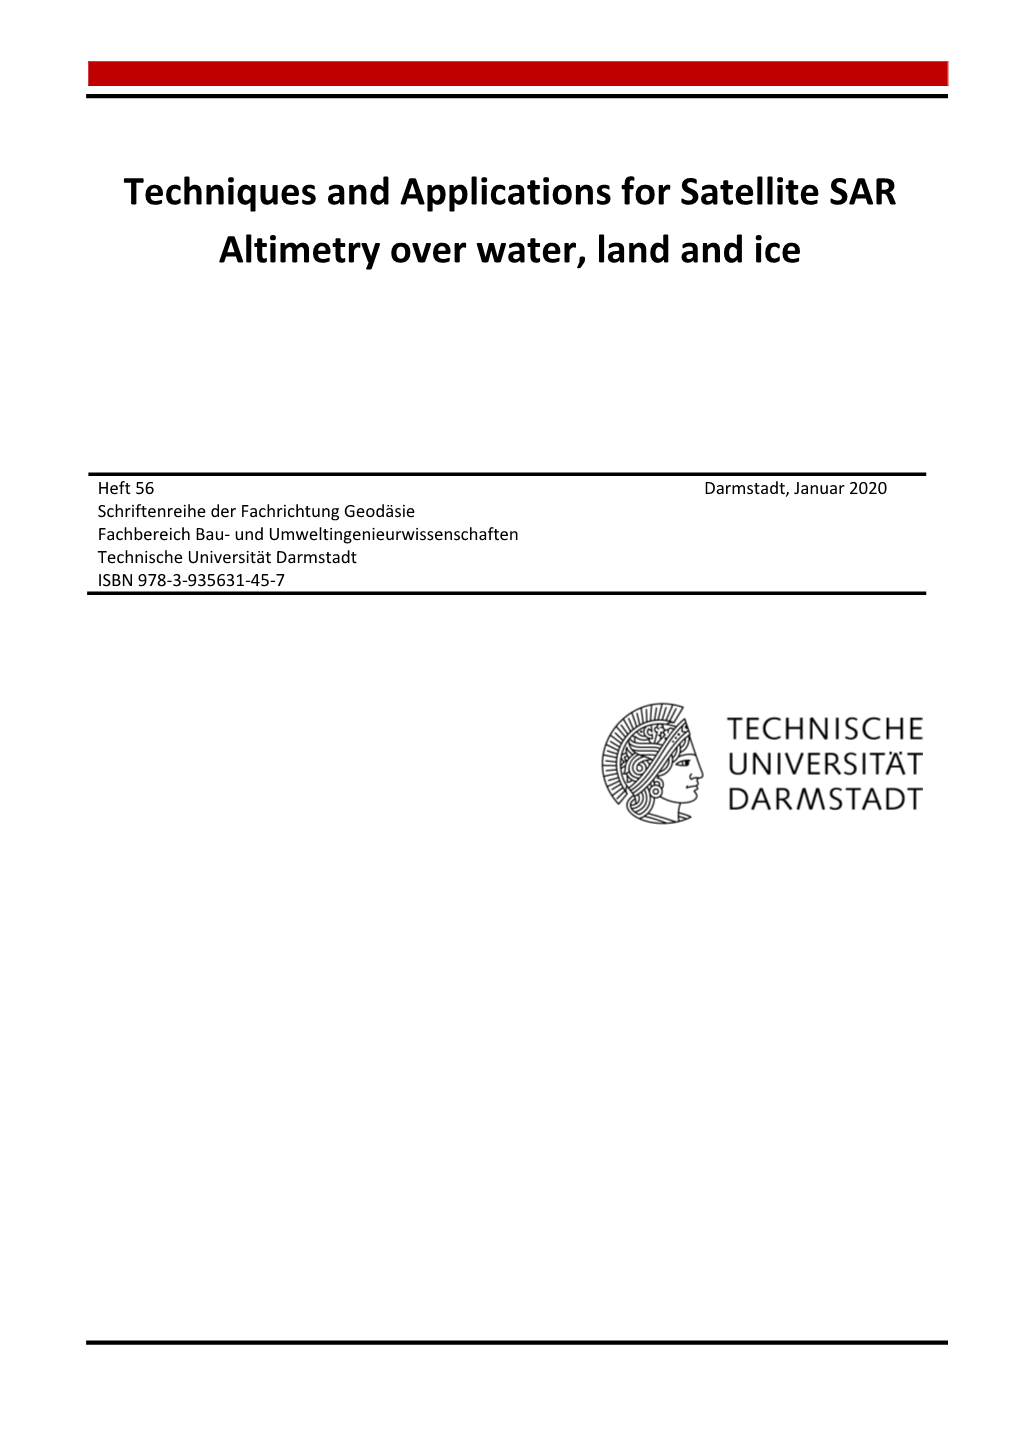 Techniques and Applications for Satellite SAR Altimetry Over Water, Land and Ice